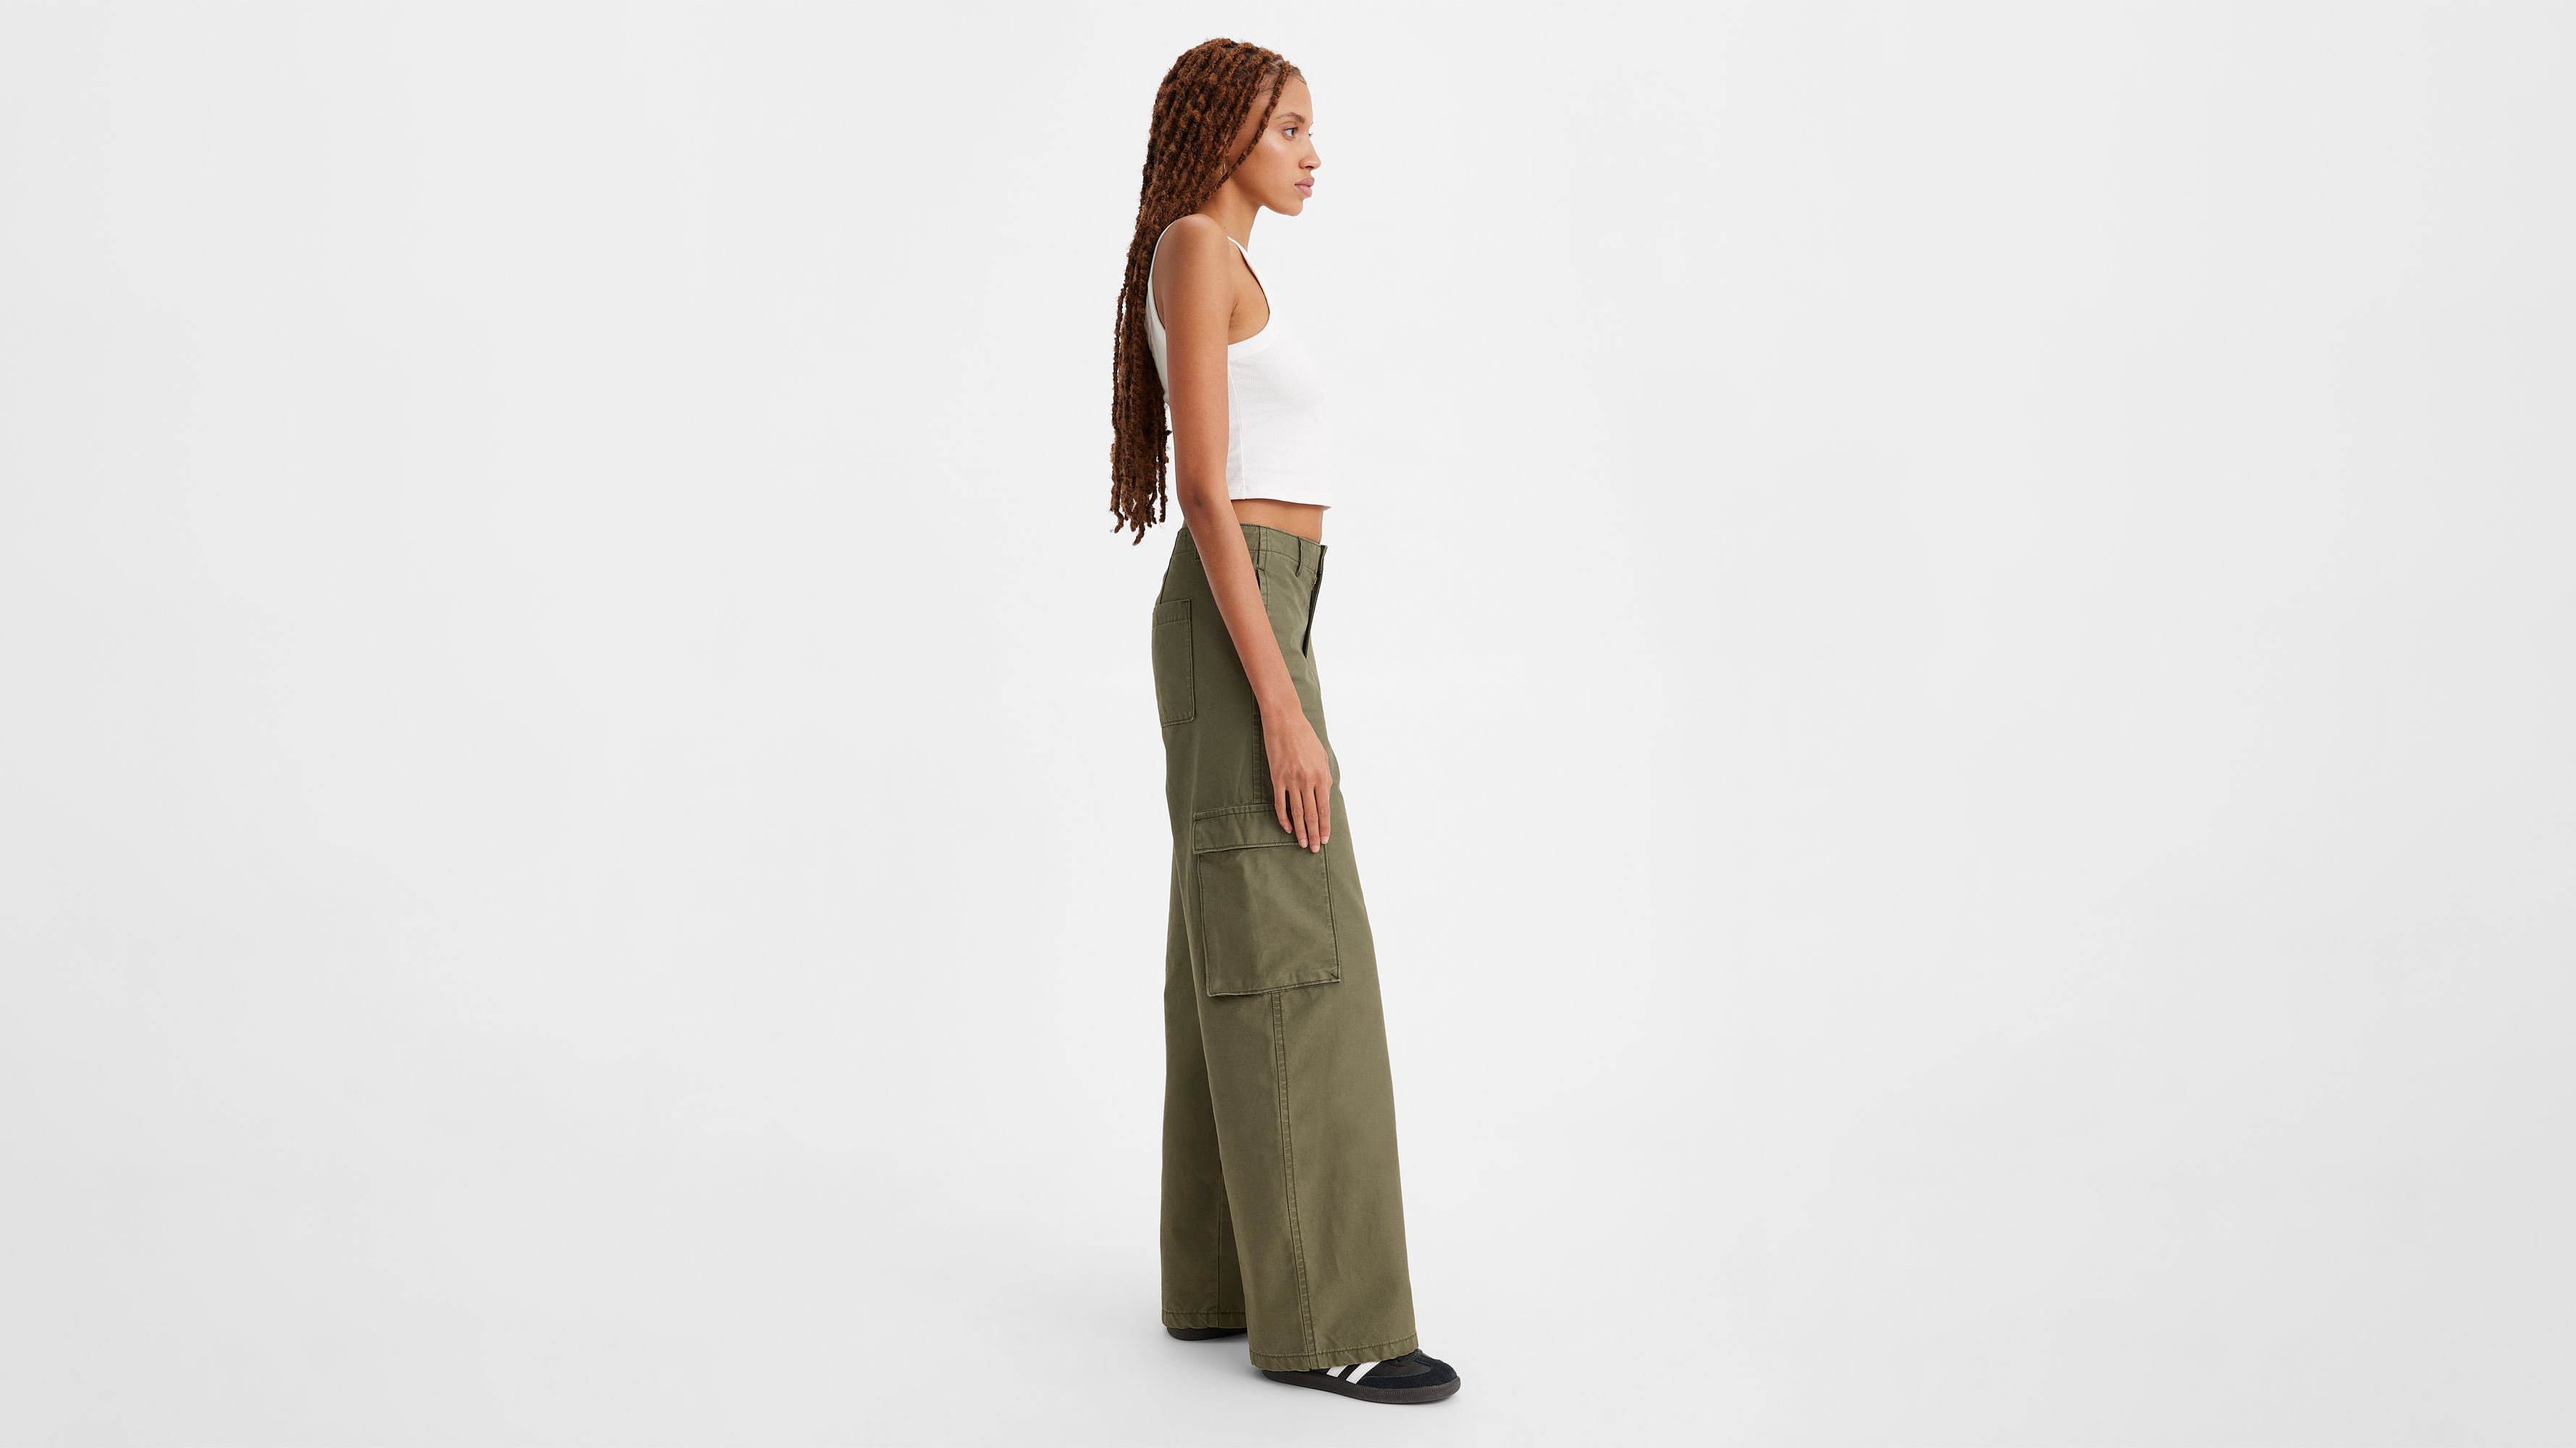 RQYYD Cargo Pants Women Casual Loose High Waisted Straight Leg Baggy Pants  Trousers Lightweight Outdoor Travel Pants with Pockets(Army Green,XL) 